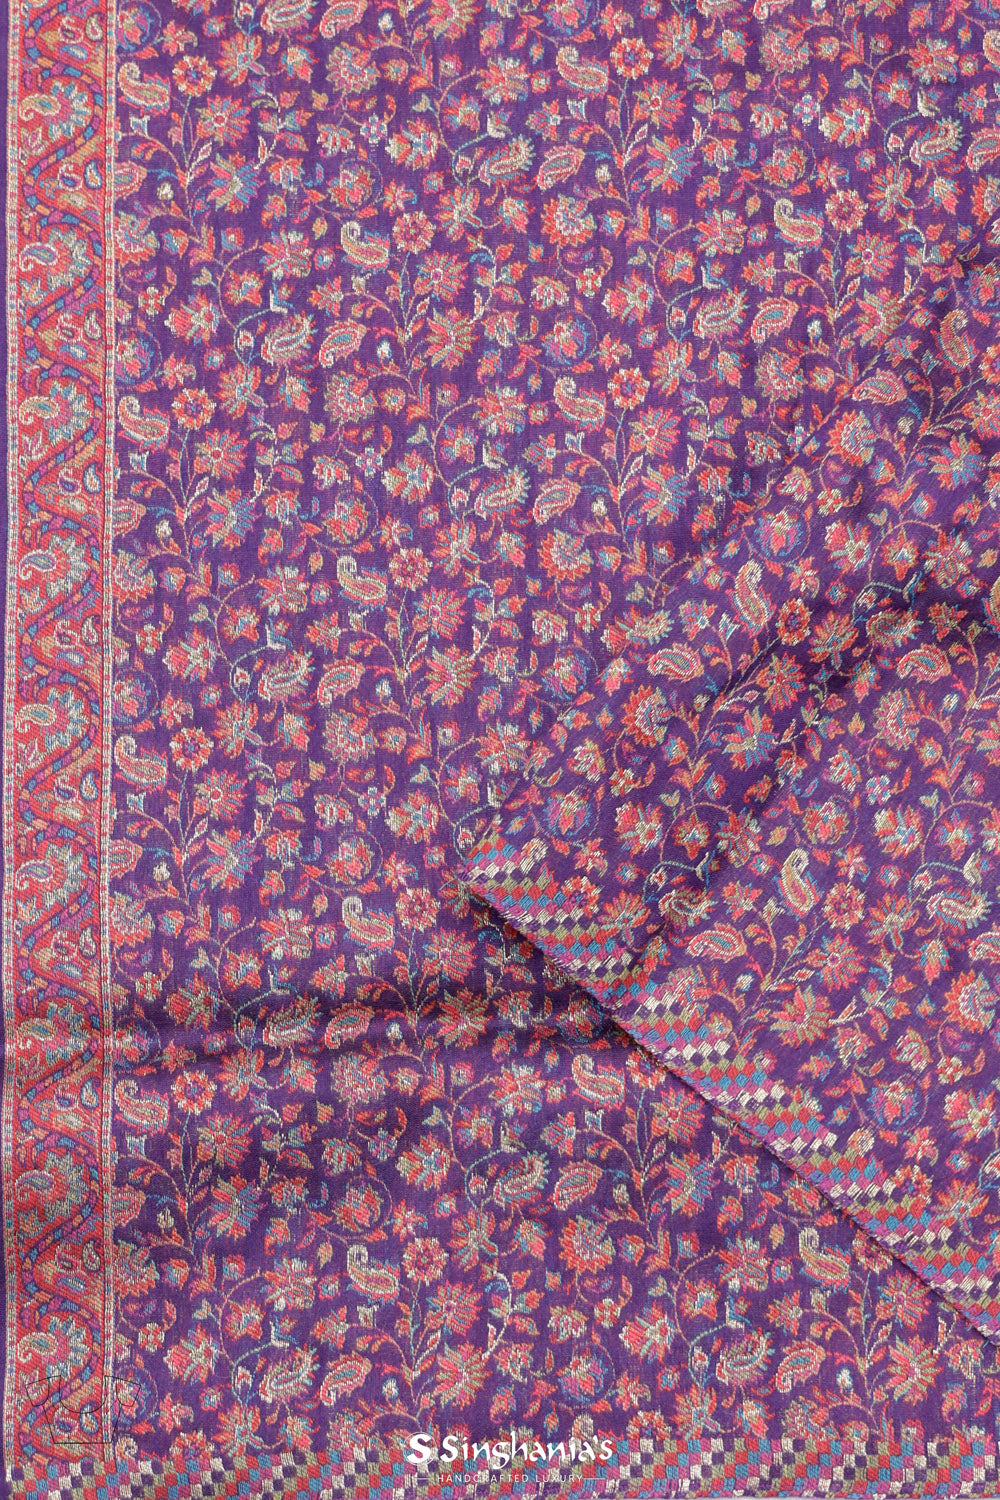 Mythical Purple Kani Handloom Saree With Floral Motifs